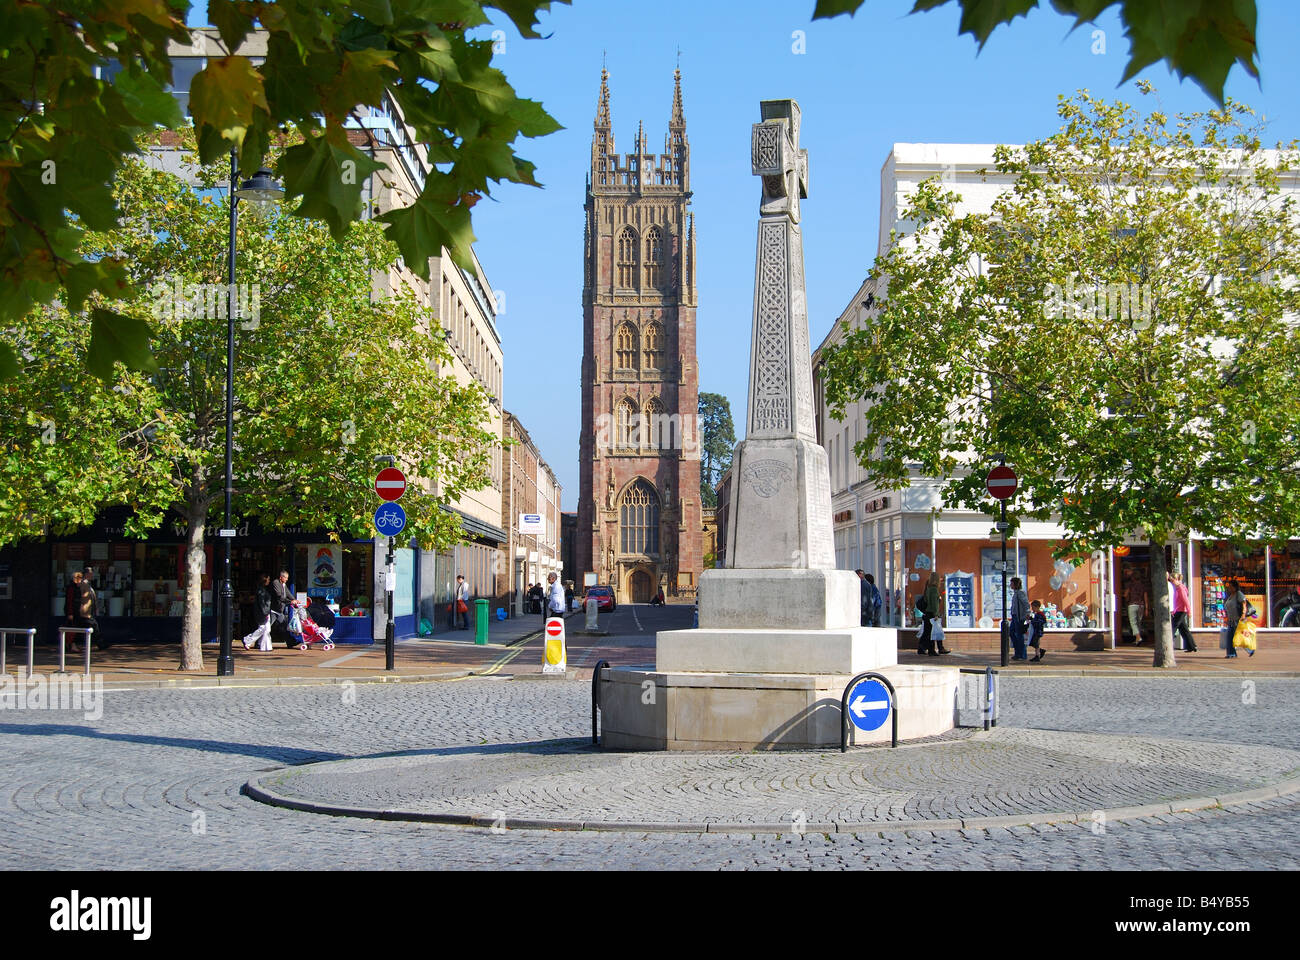 The War Memorial and Town centre, Taunton, Somerset, England, United Kingdom Stock Photo